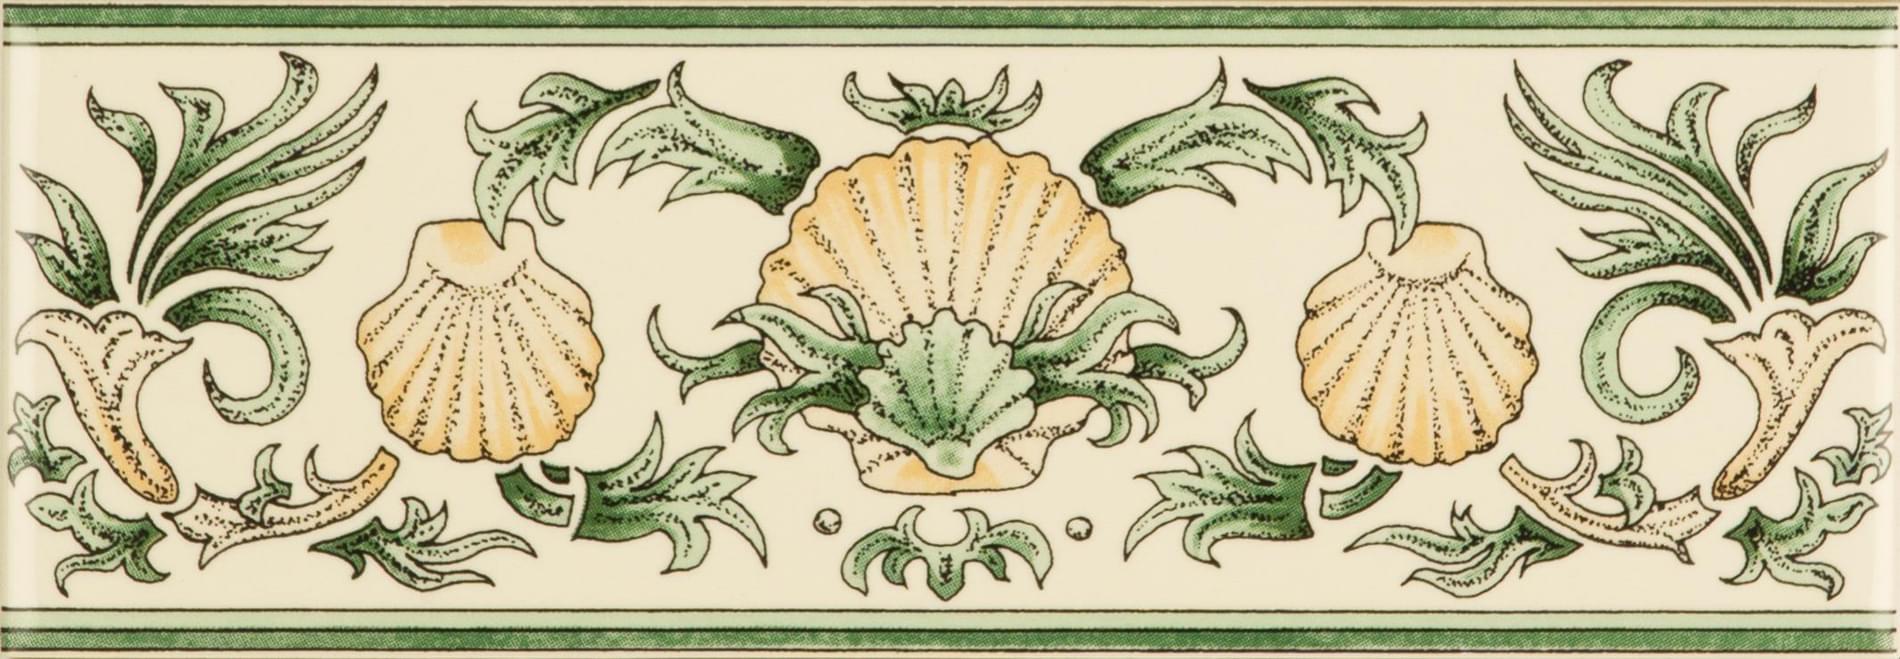 Original Style Artworks Colonial White Scallop Shells Green And Buff 5x15.2